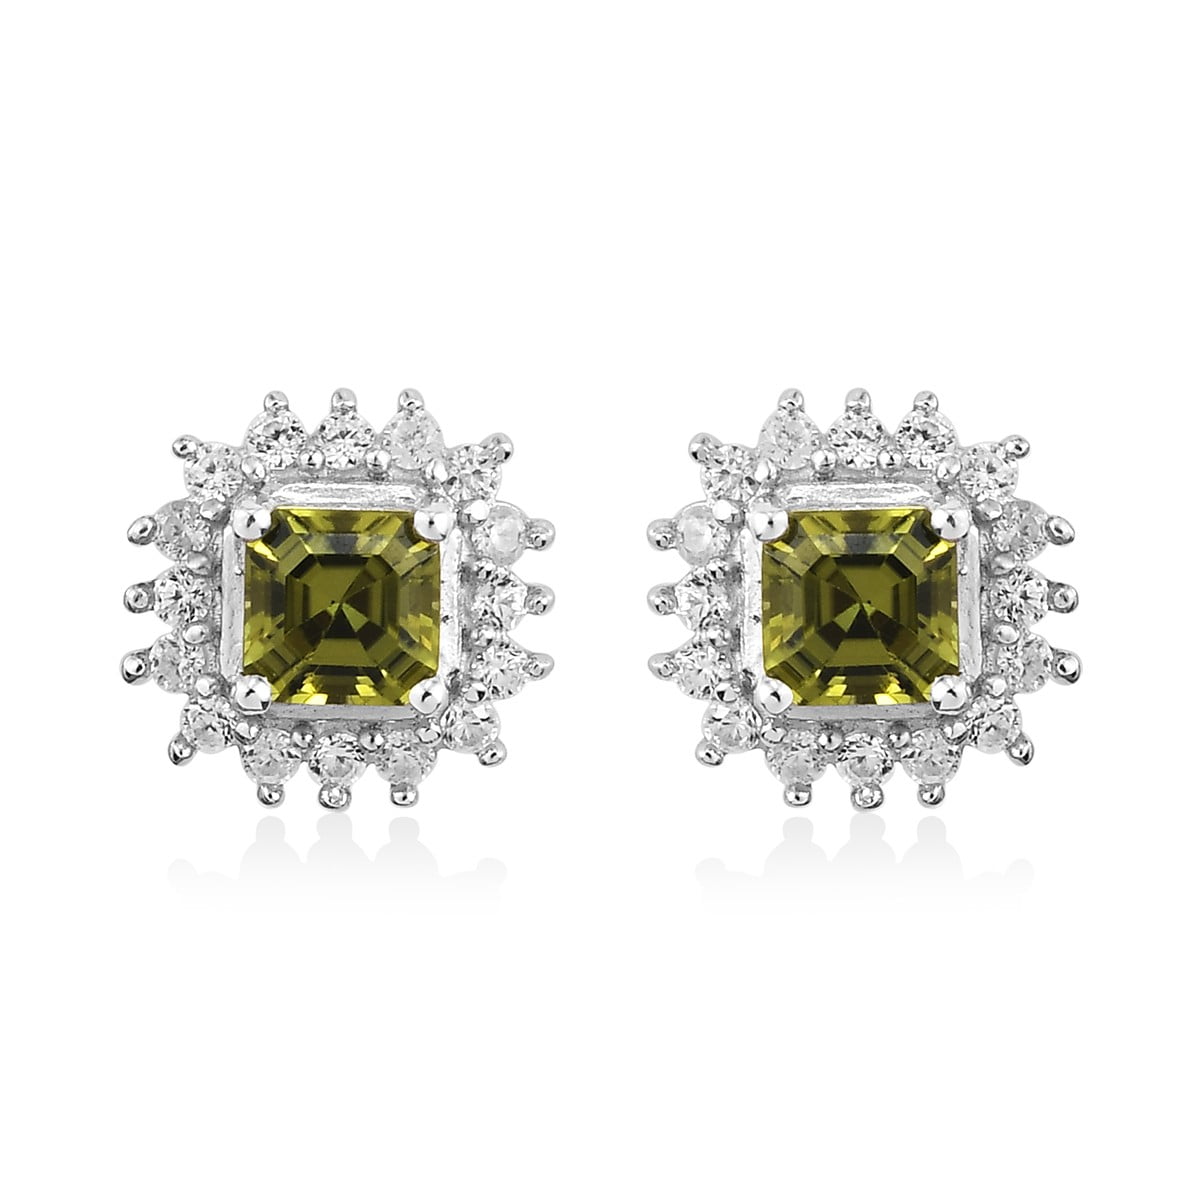 10MM Solitaire Stud Earrings 14K White Gold Over .925 Sterling Silver For Womens Round Cut Created Gemstones